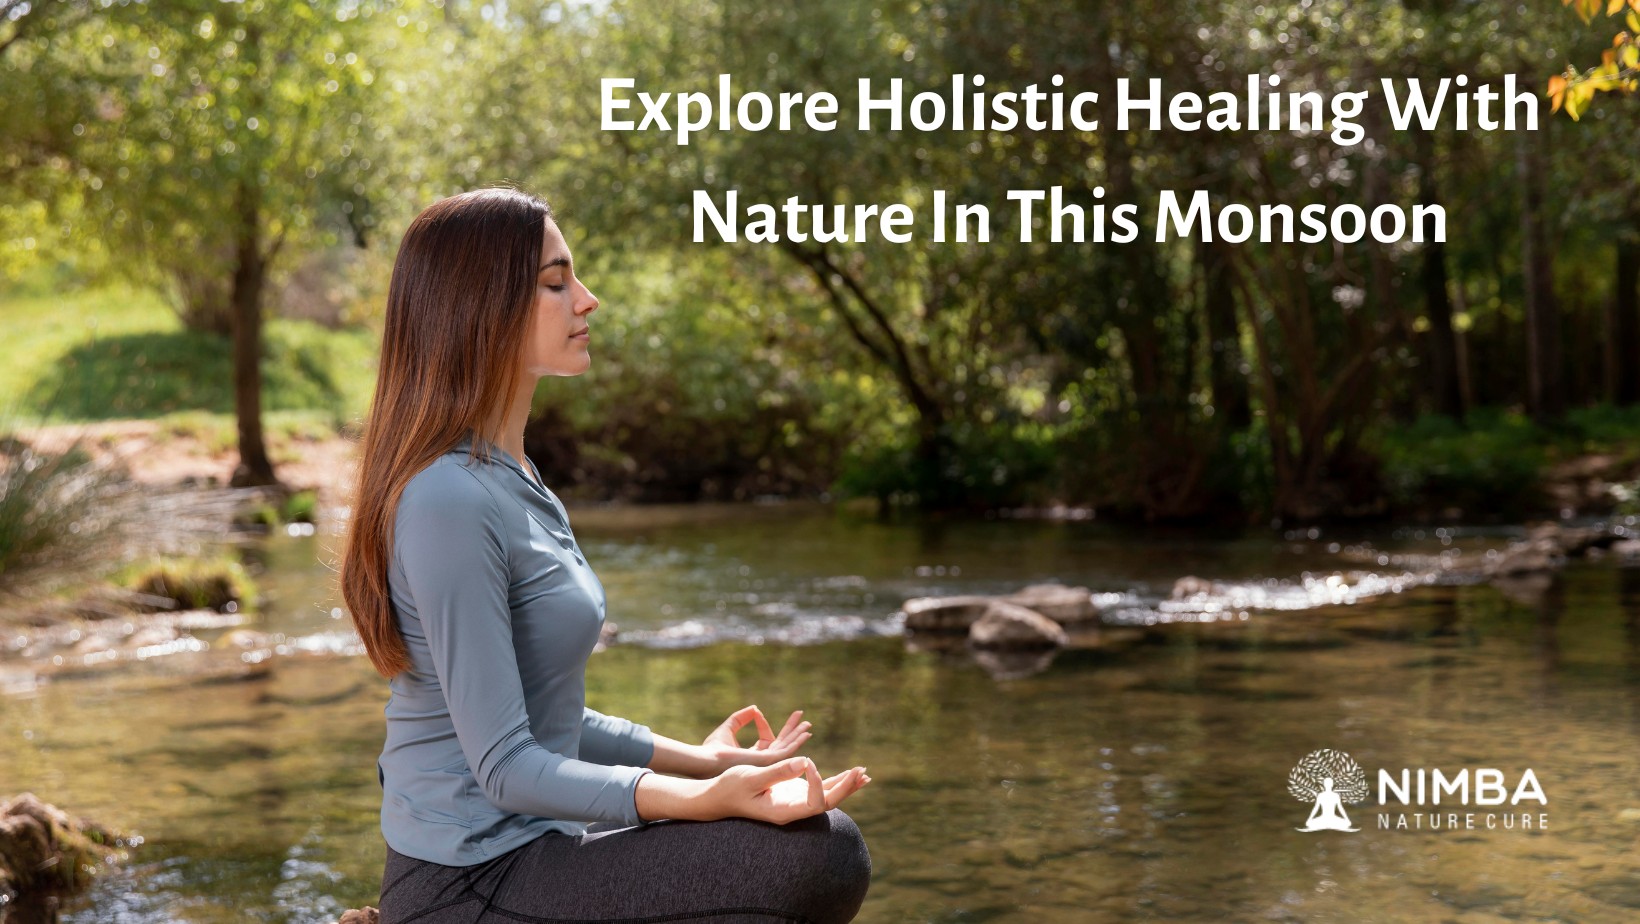 Explore Holistic Healing With Nature In This Monsoon